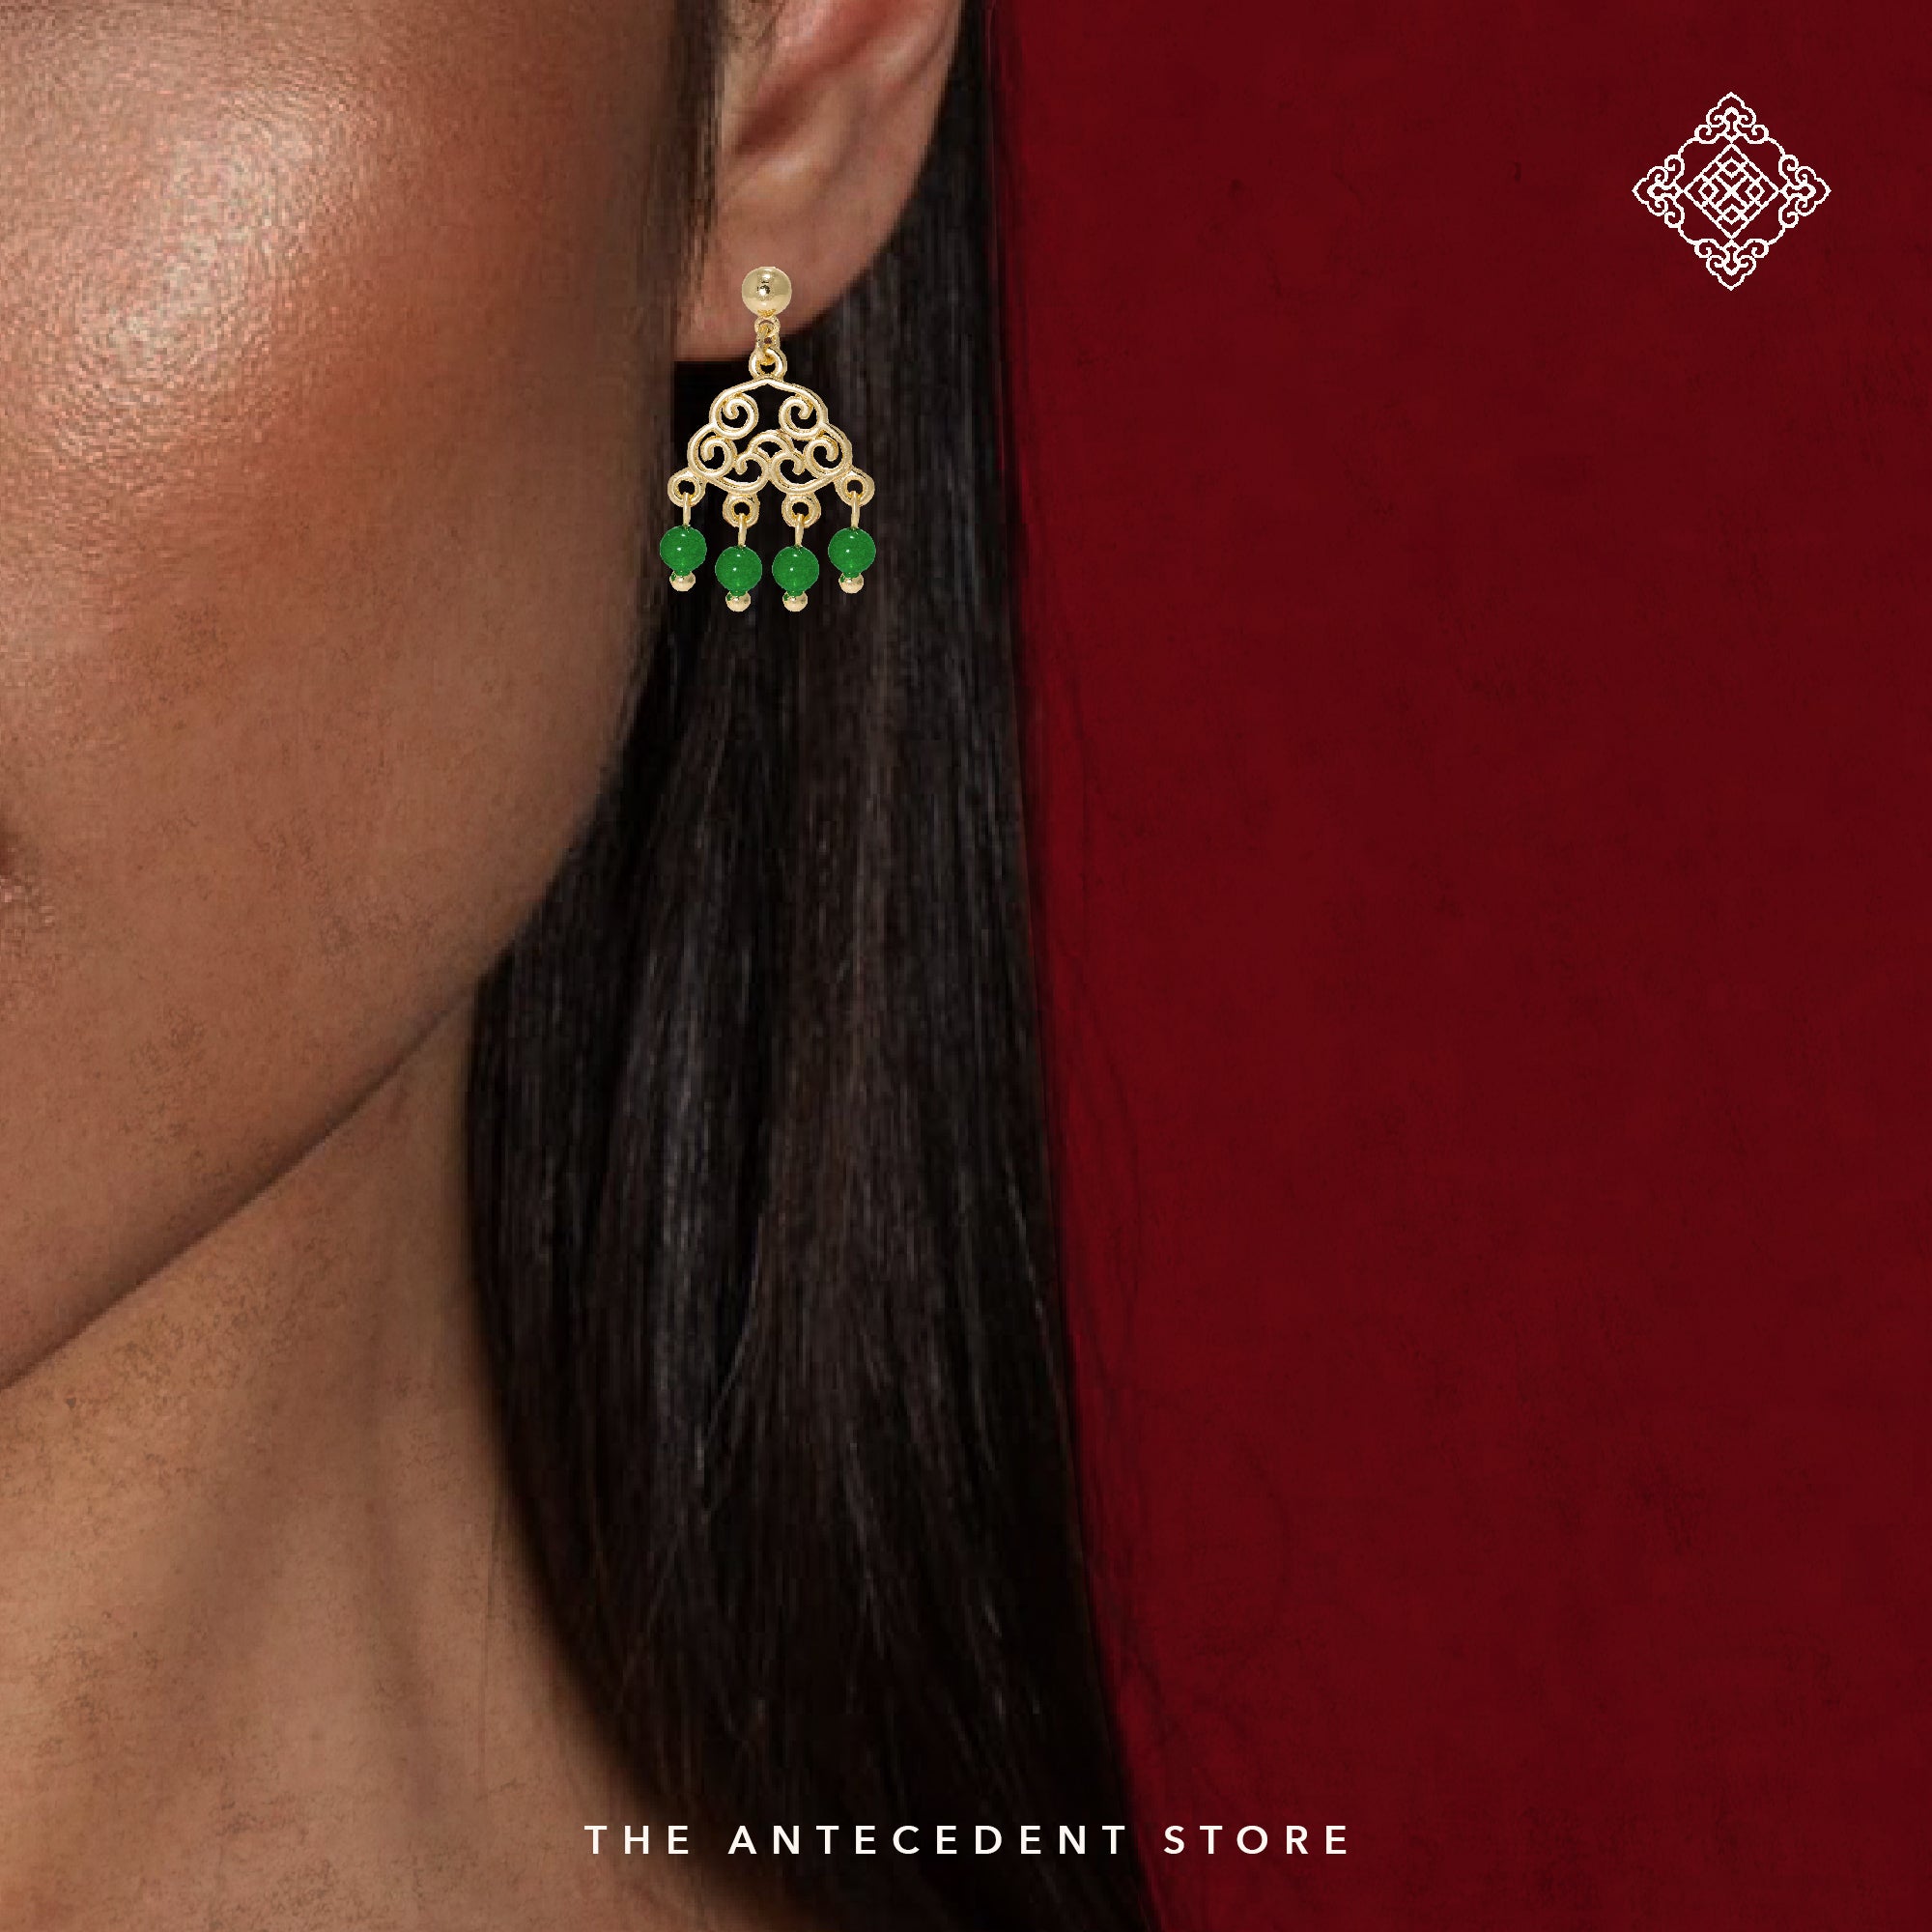 Oriental Motif Earrings With Green Chalcedony Crystals - 14K Real Gold Plated Jewelry